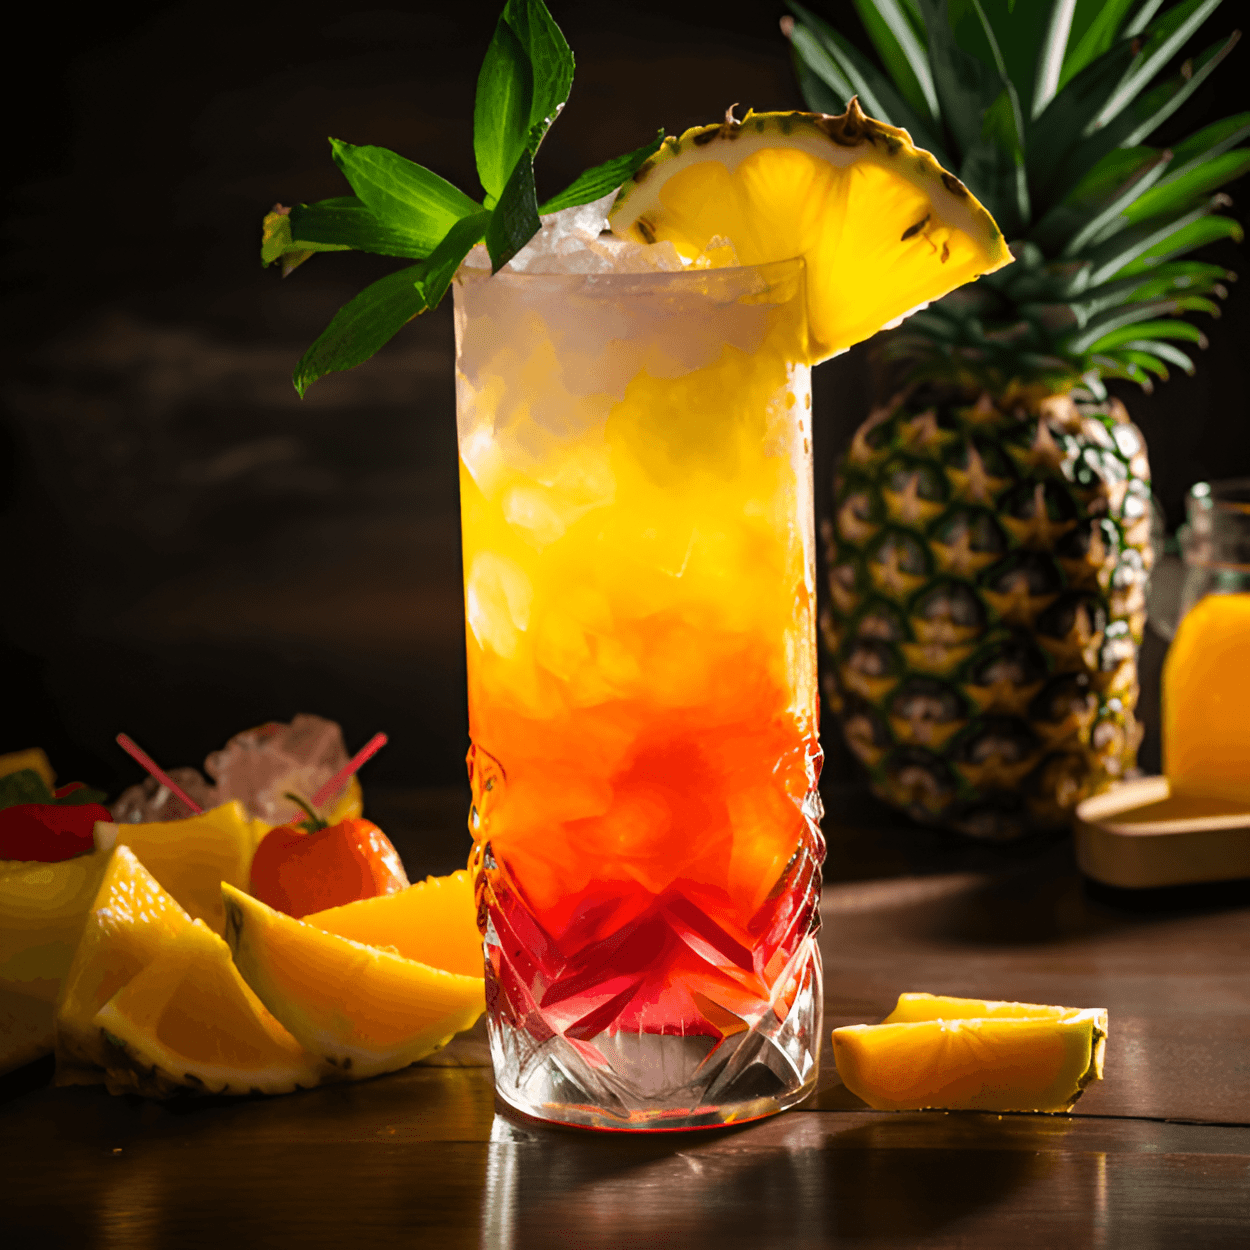 Pineapple Screwdriver Cocktail Recipe - The Pineapple Screwdriver is a sweet, tangy, and refreshing cocktail. The vodka provides a strong, smooth base, while the orange and pineapple juices add a tropical sweetness that's balanced by a slight tartness. The overall taste is fruity, vibrant, and slightly acidic.